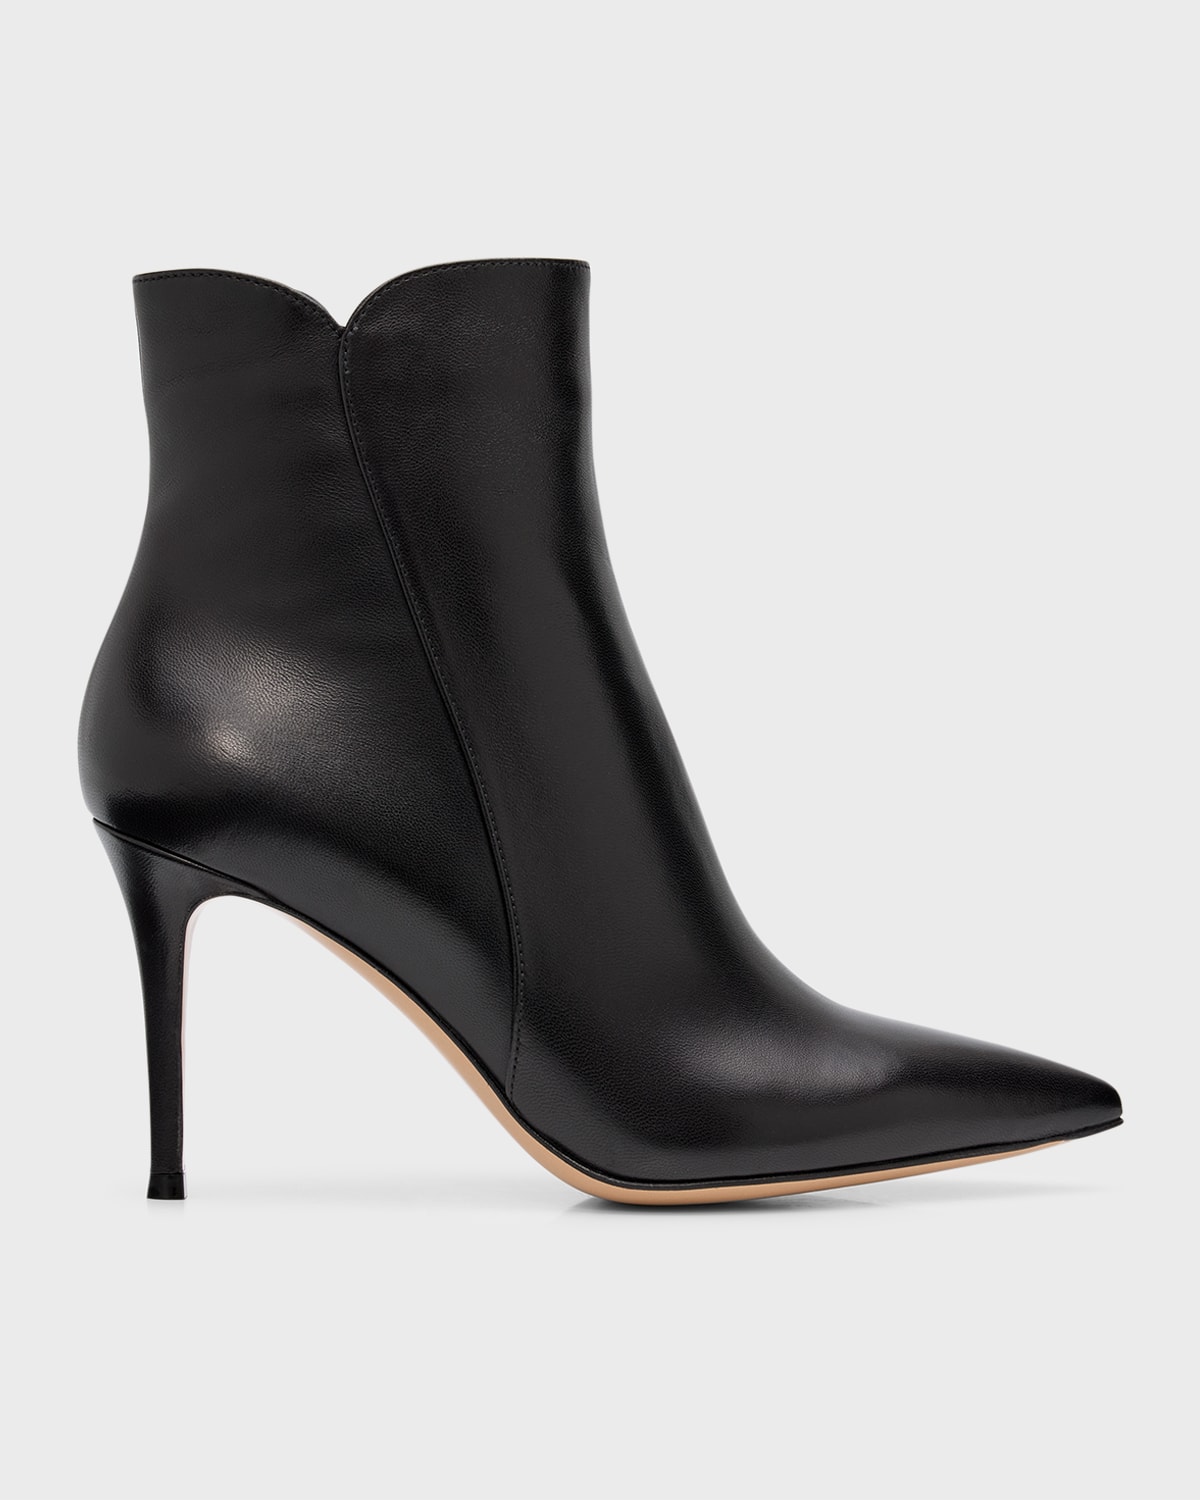 GIANVITO ROSSI LEVY NOTCHED LEATHER 85MM BOOTIES